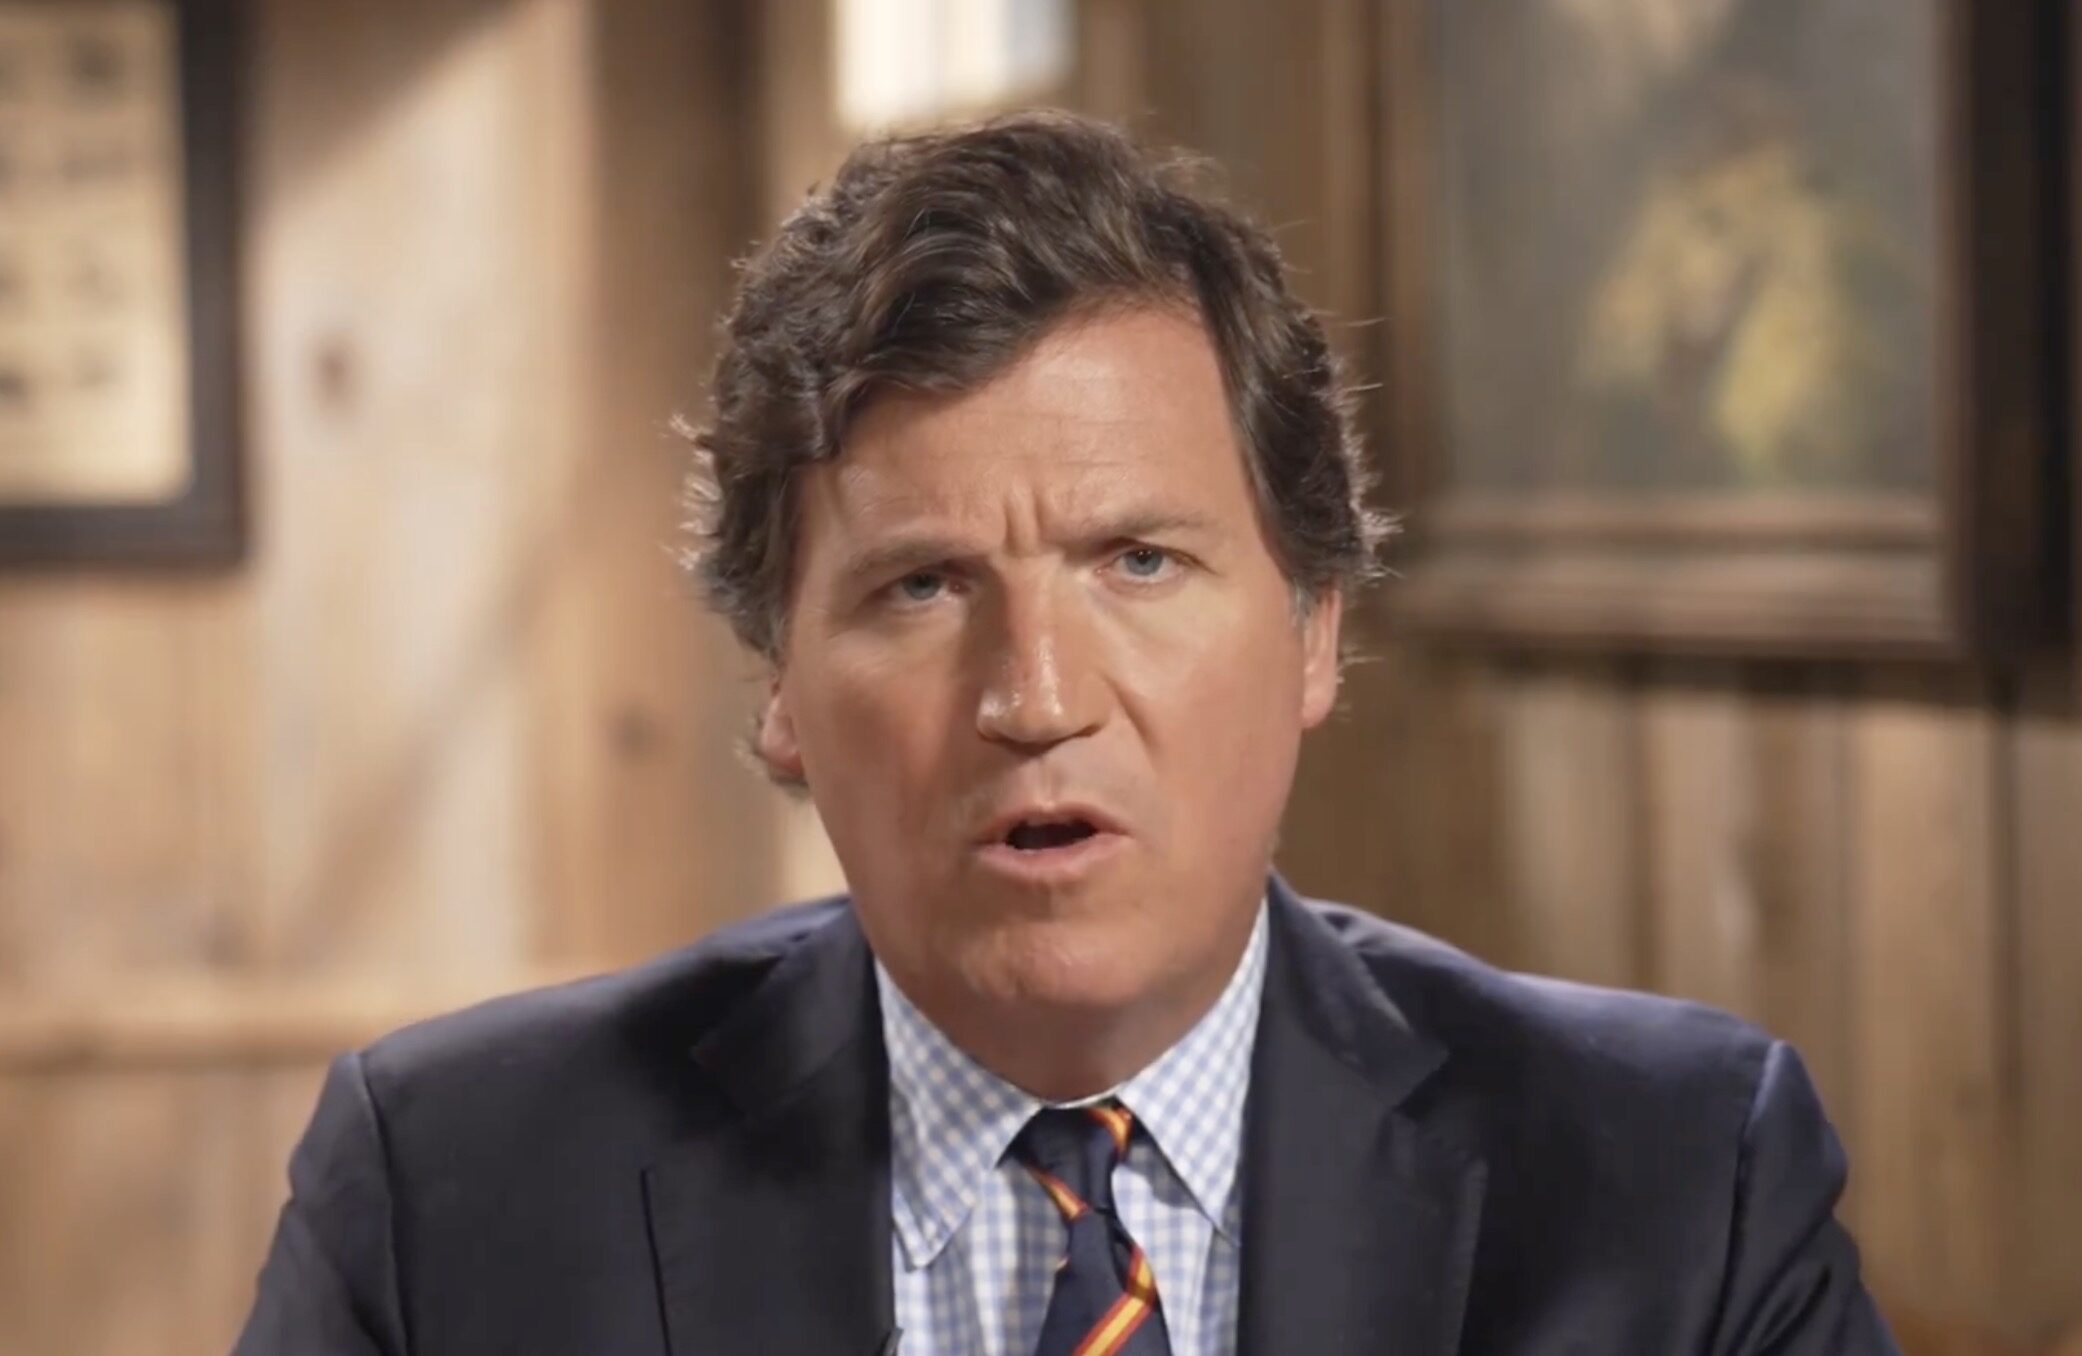 Tucker Carlson Reportedly Spotted In Moscow As Fans Speculate Interview With Putin (mediaite.com)